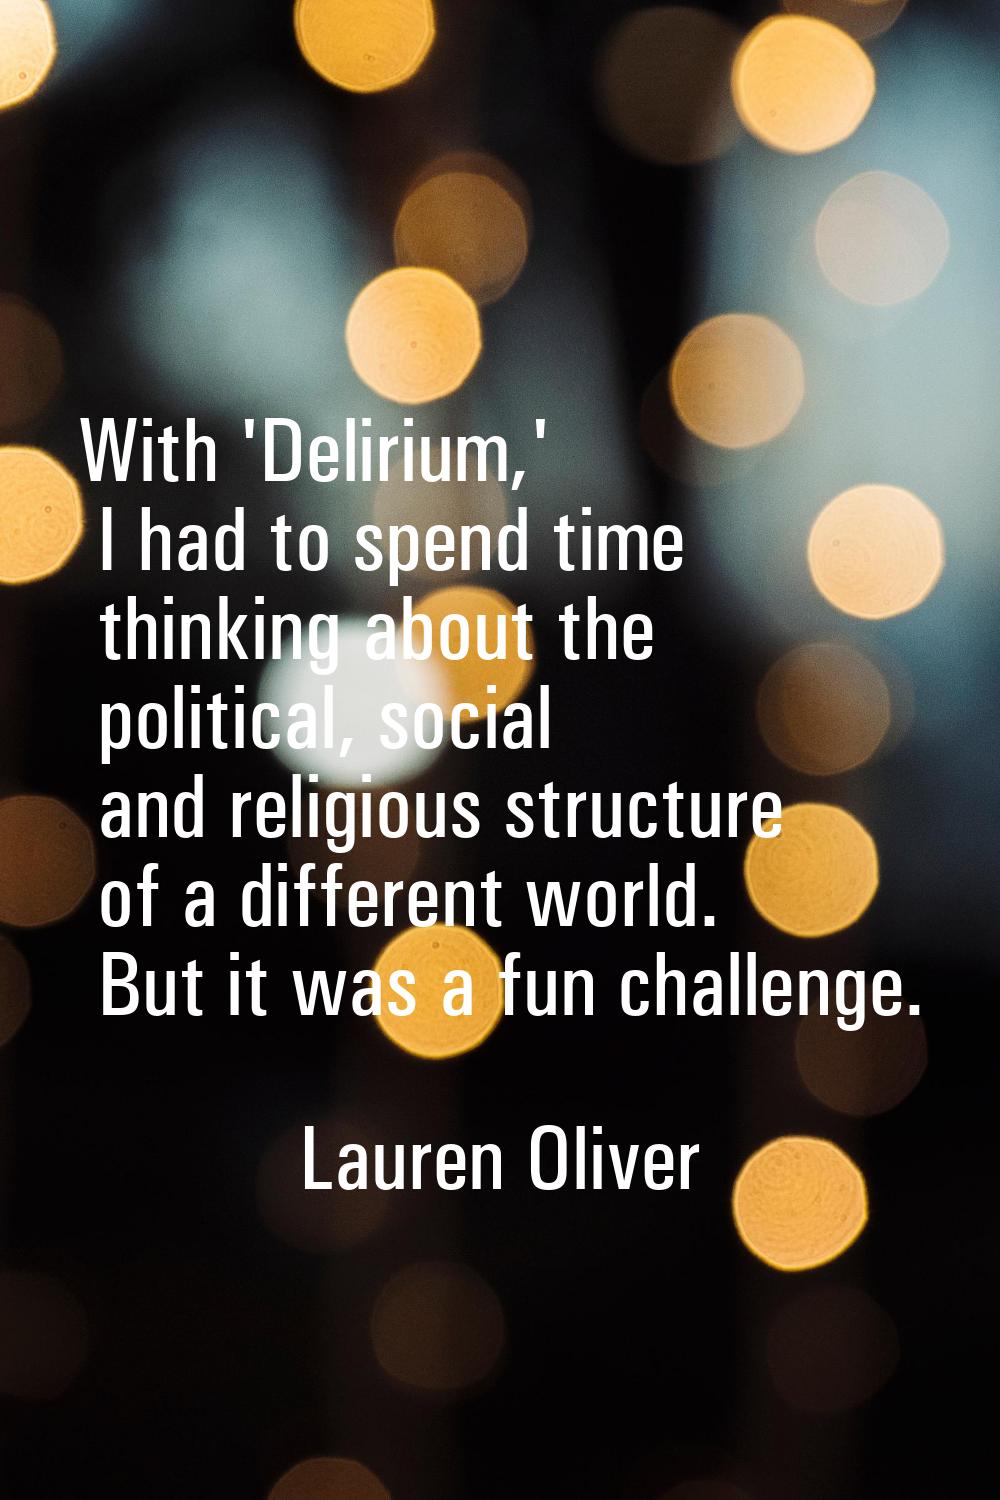 With 'Delirium,' I had to spend time thinking about the political, social and religious structure o